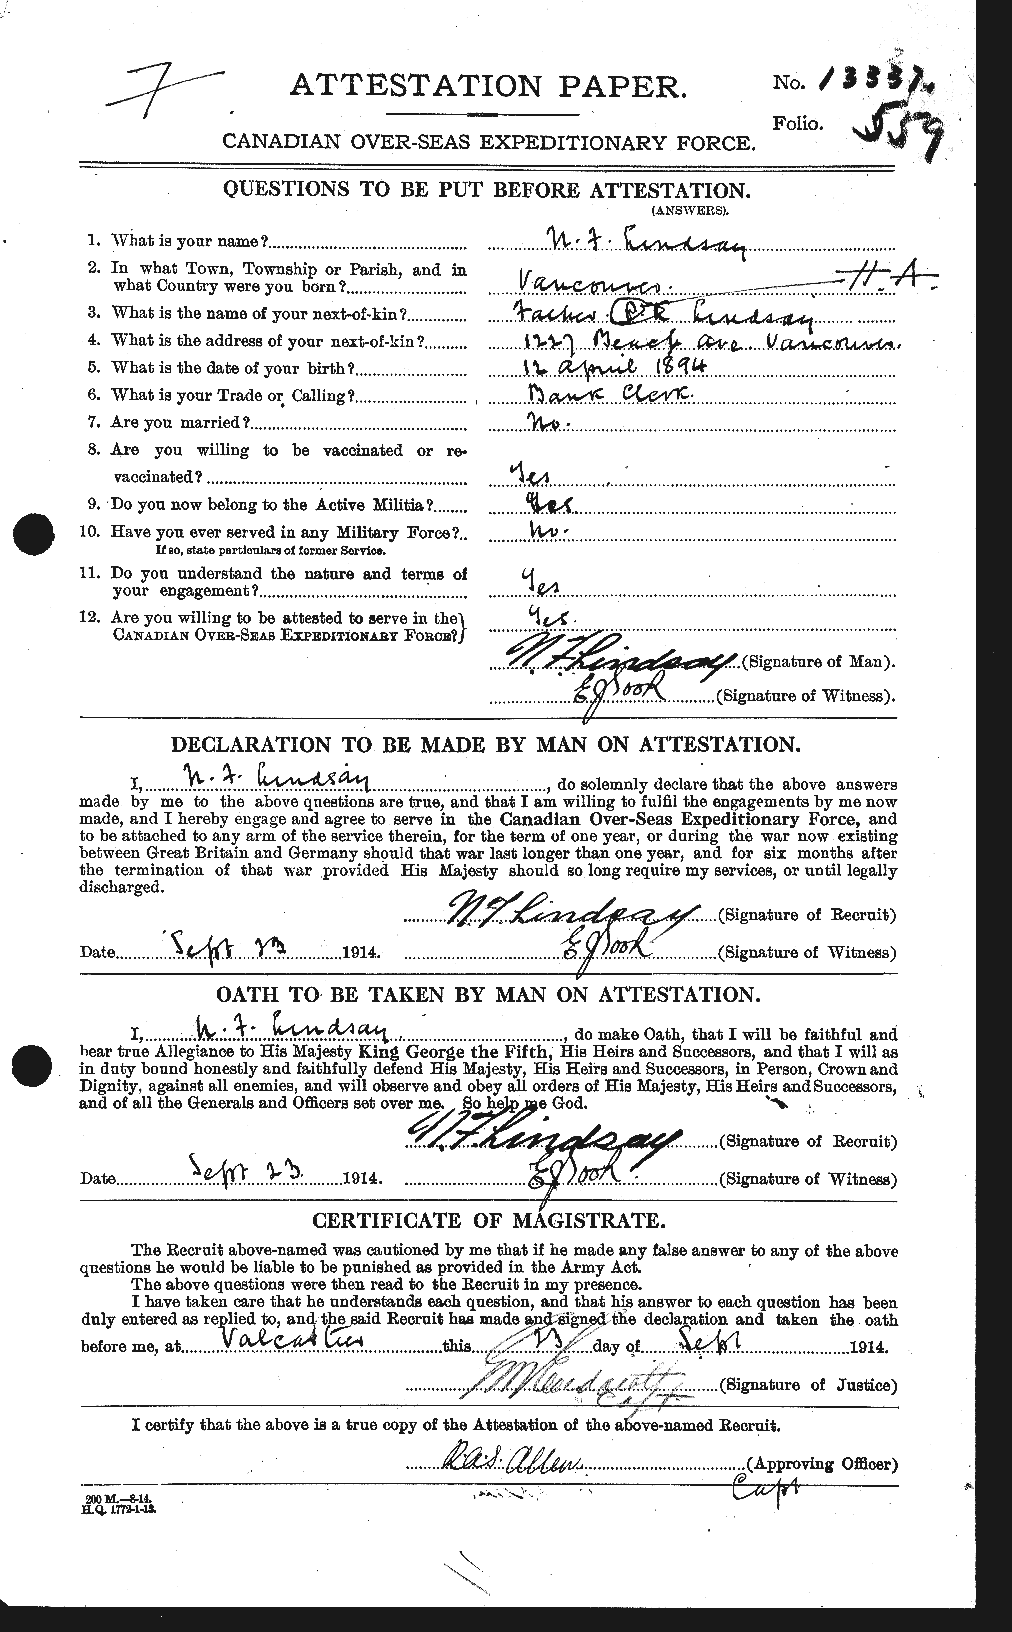 Personnel Records of the First World War - CEF 466158a